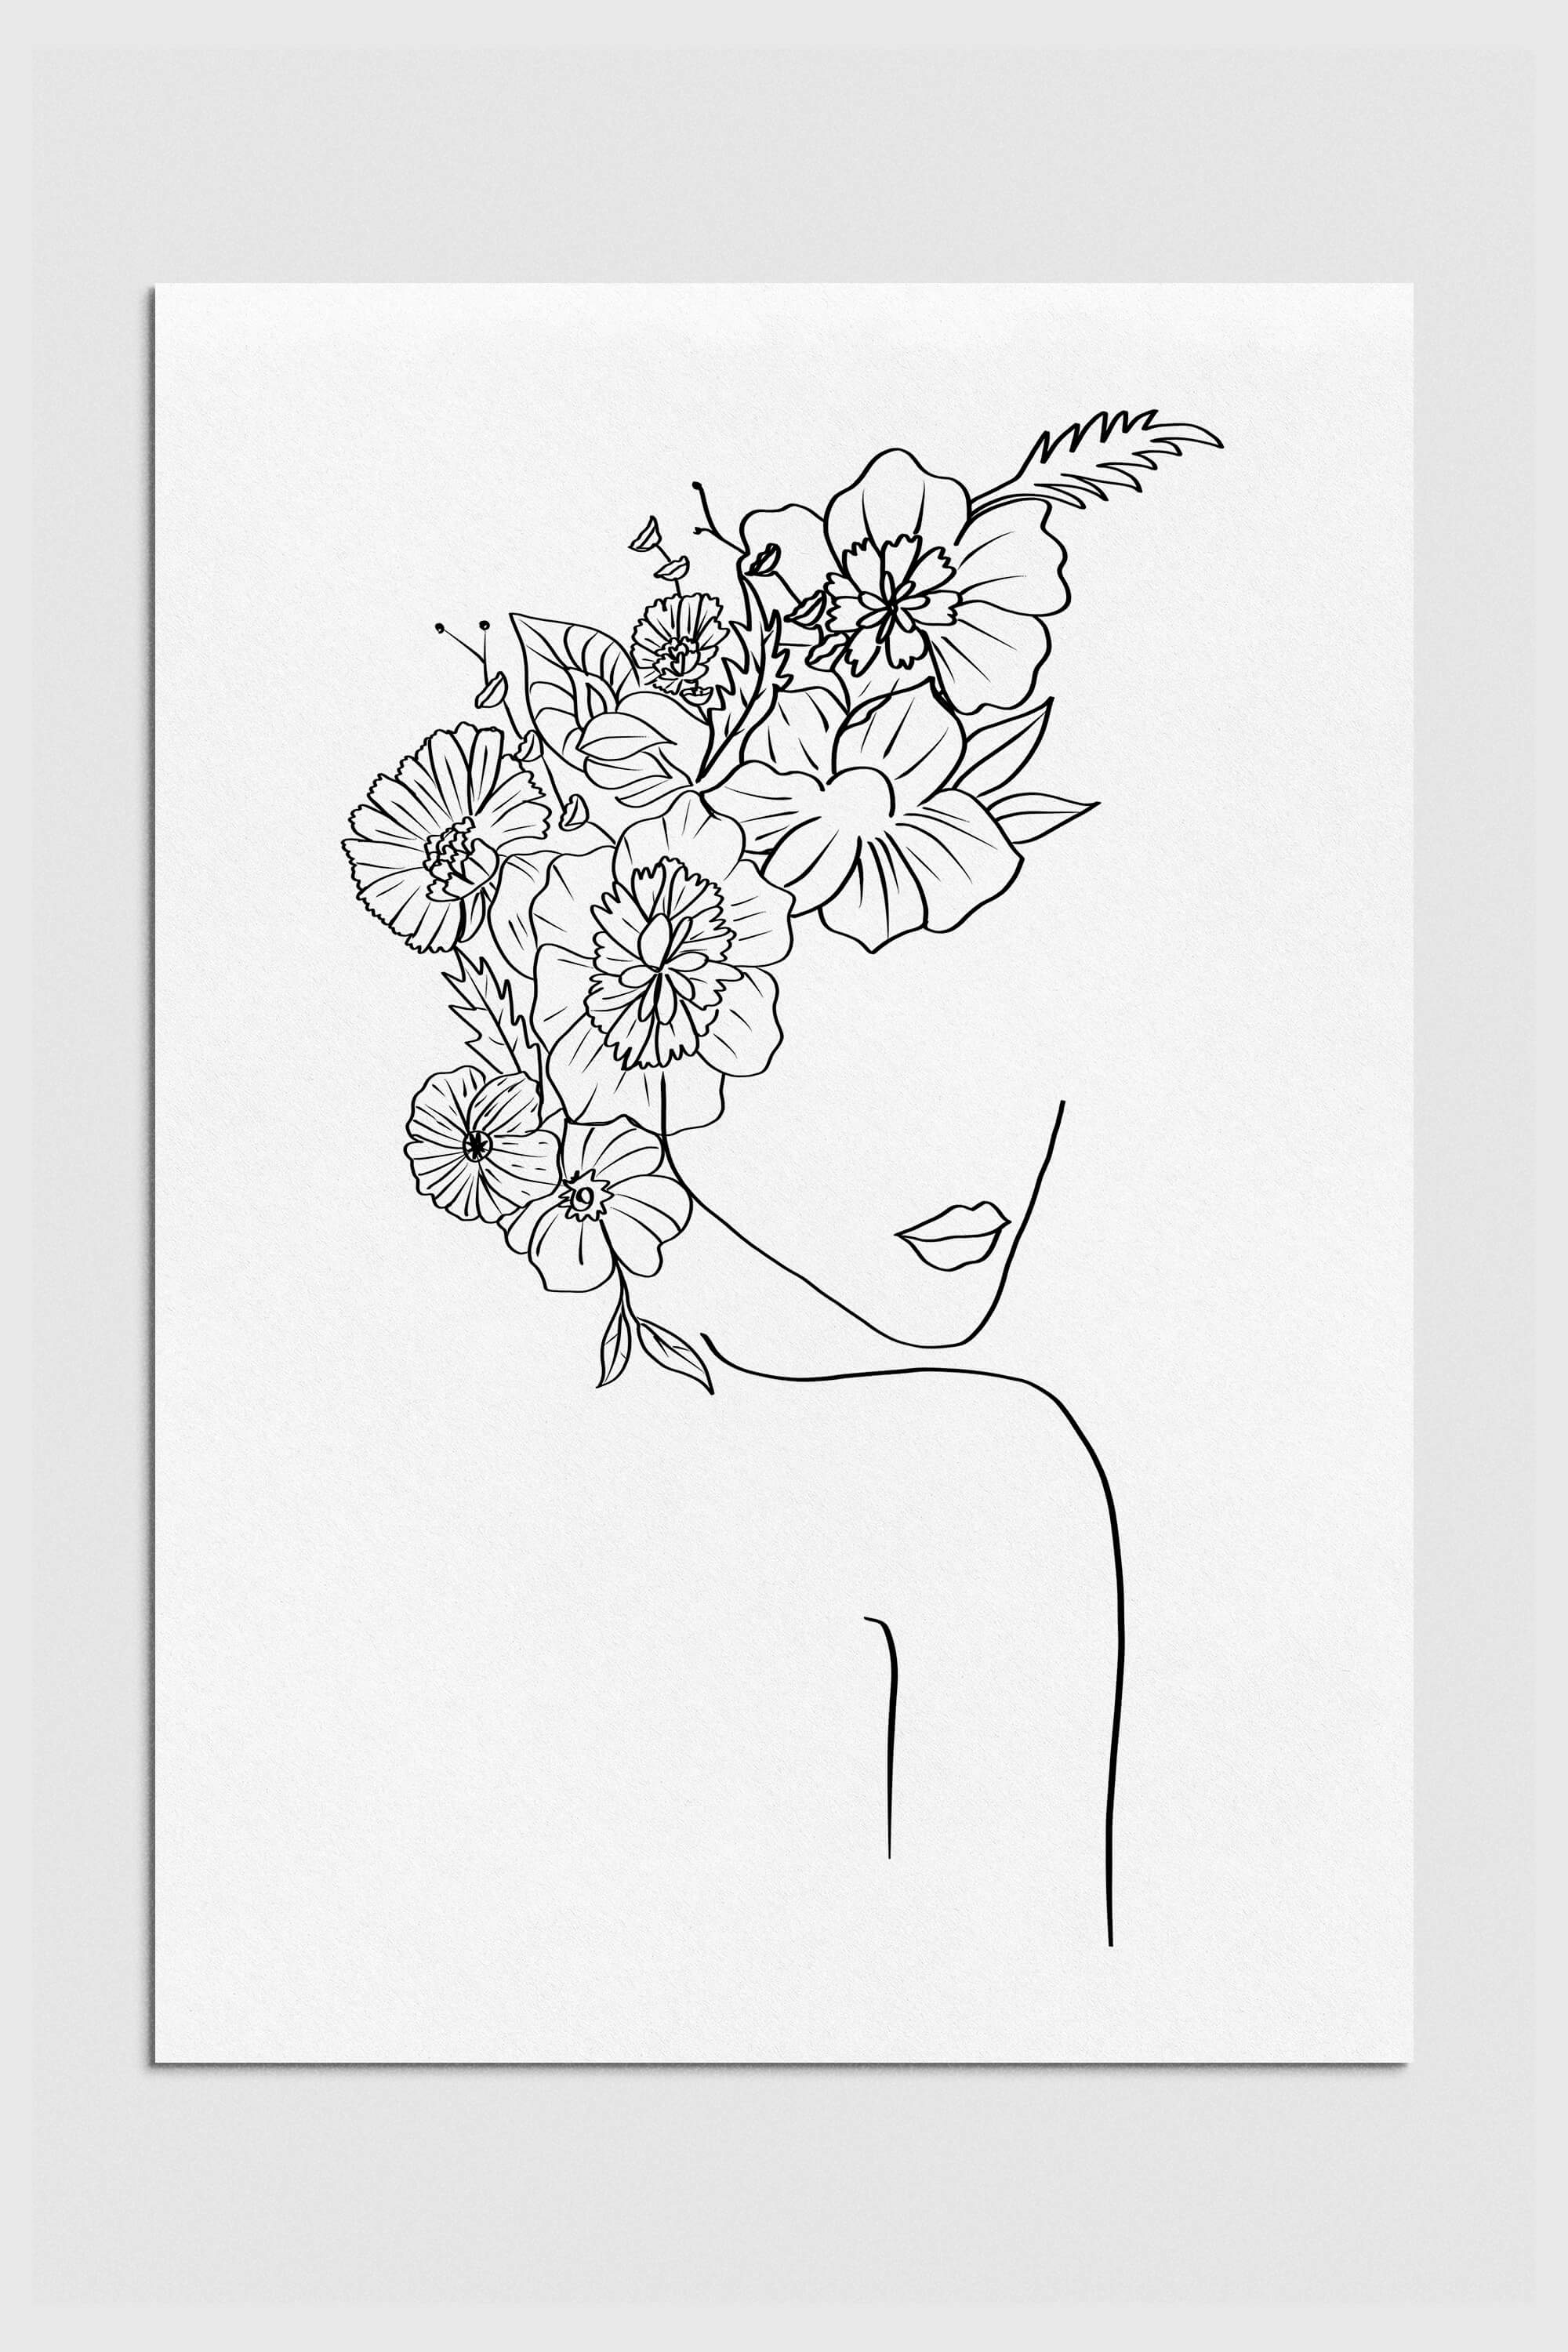 Elegant monochrome floral woman art print featuring a graceful female portrait surrounded by intricate botanical elements. Timeless black and white design for chic wall decor.